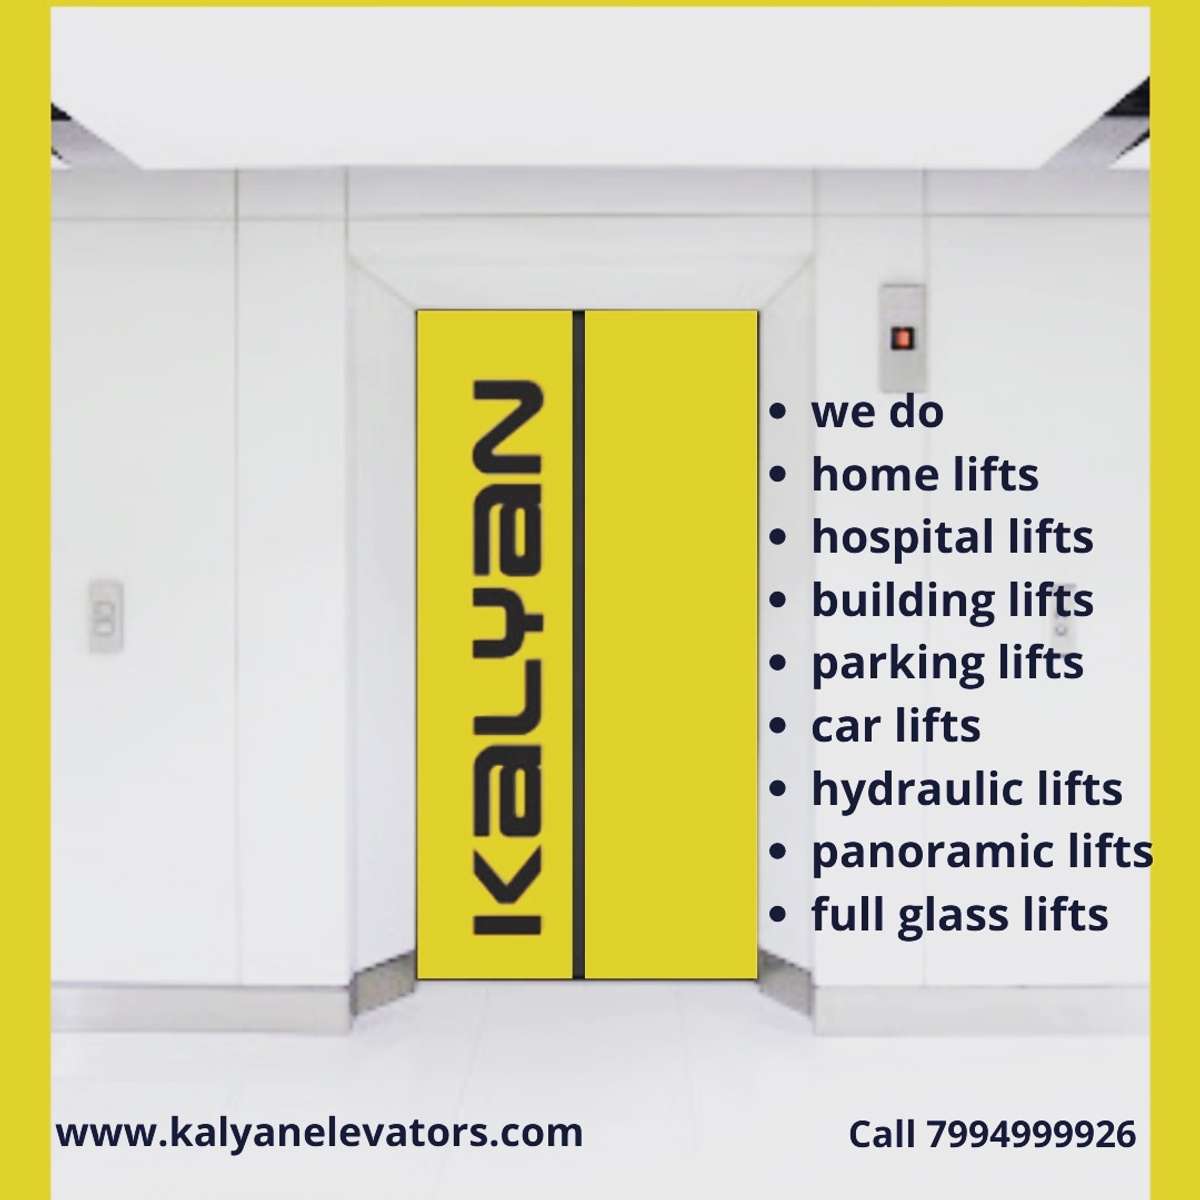 ##Kalyan Elevators offers the long-awaited solution to vertical mobility within homes at affordable prices and easy-to-use features. Our customized and aesthetically designed home lifts are easily installable in preexisting homes as well as houses under construction, and help you relieve the headache of climbing. More details:-